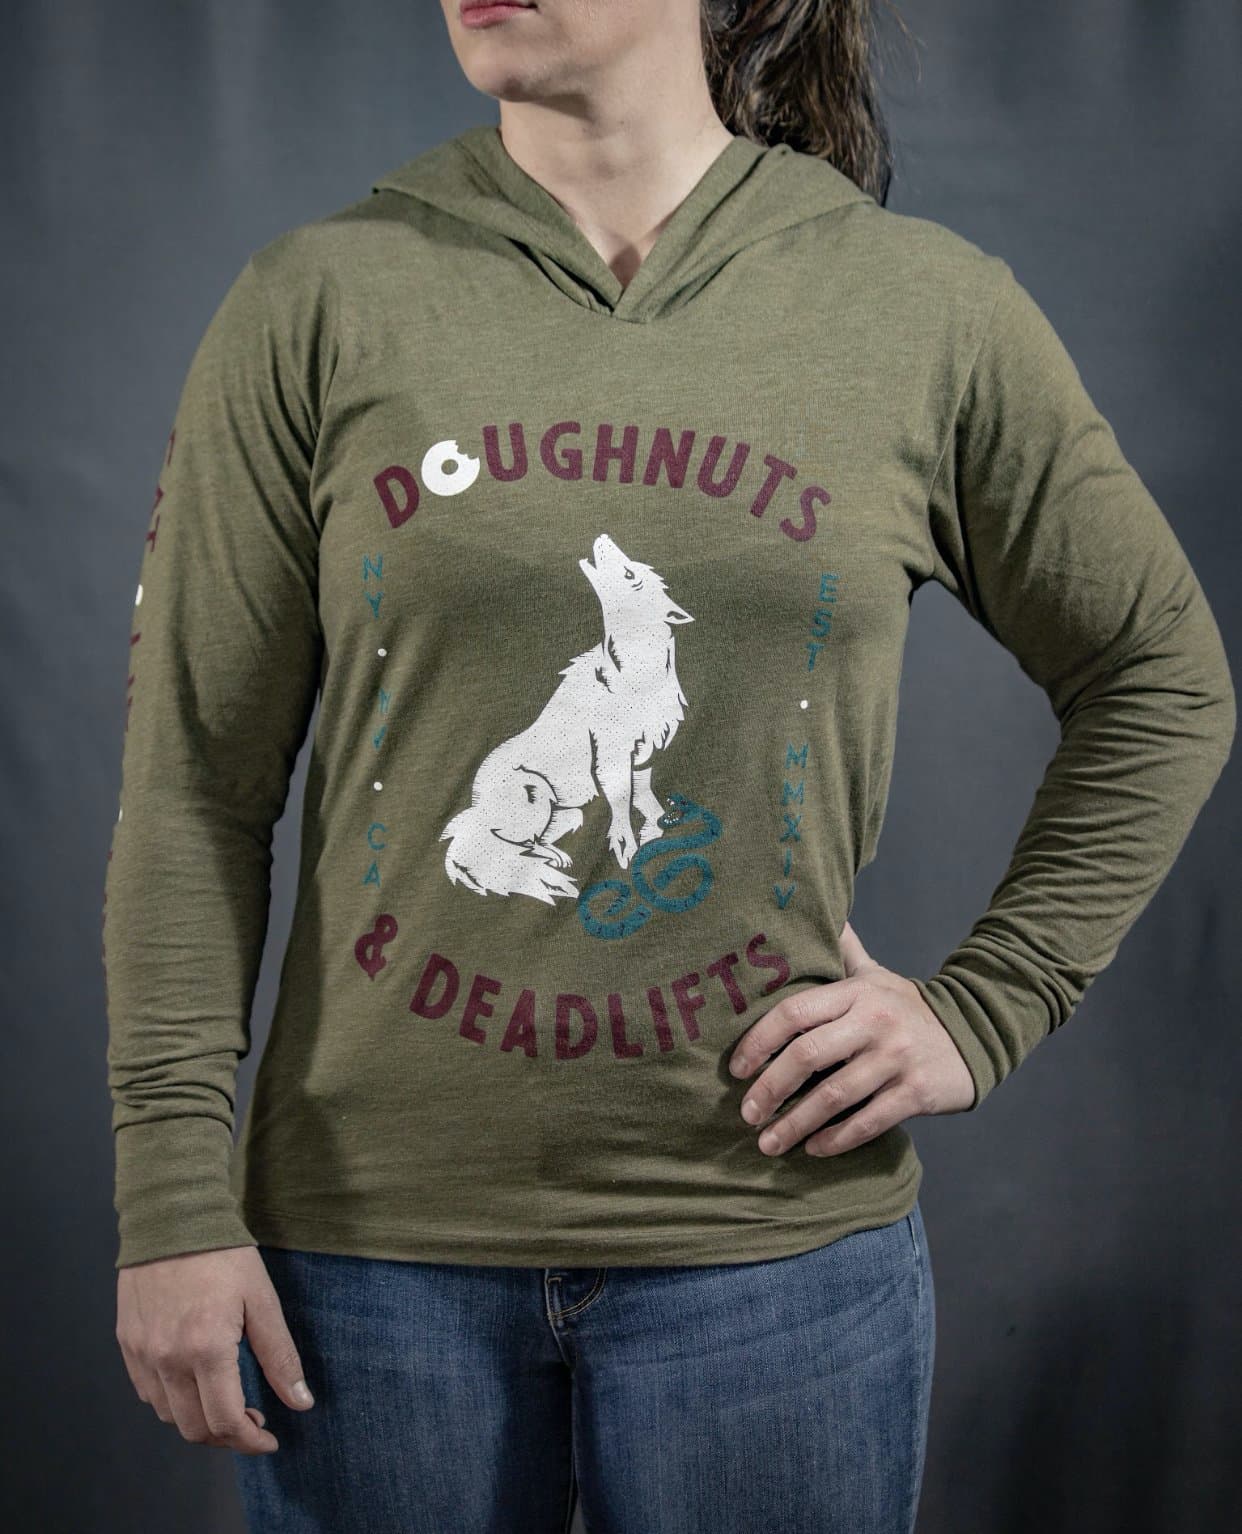 Doughnuts & Deadlifts Howling at the Moondough Hoodie - 9 for 9